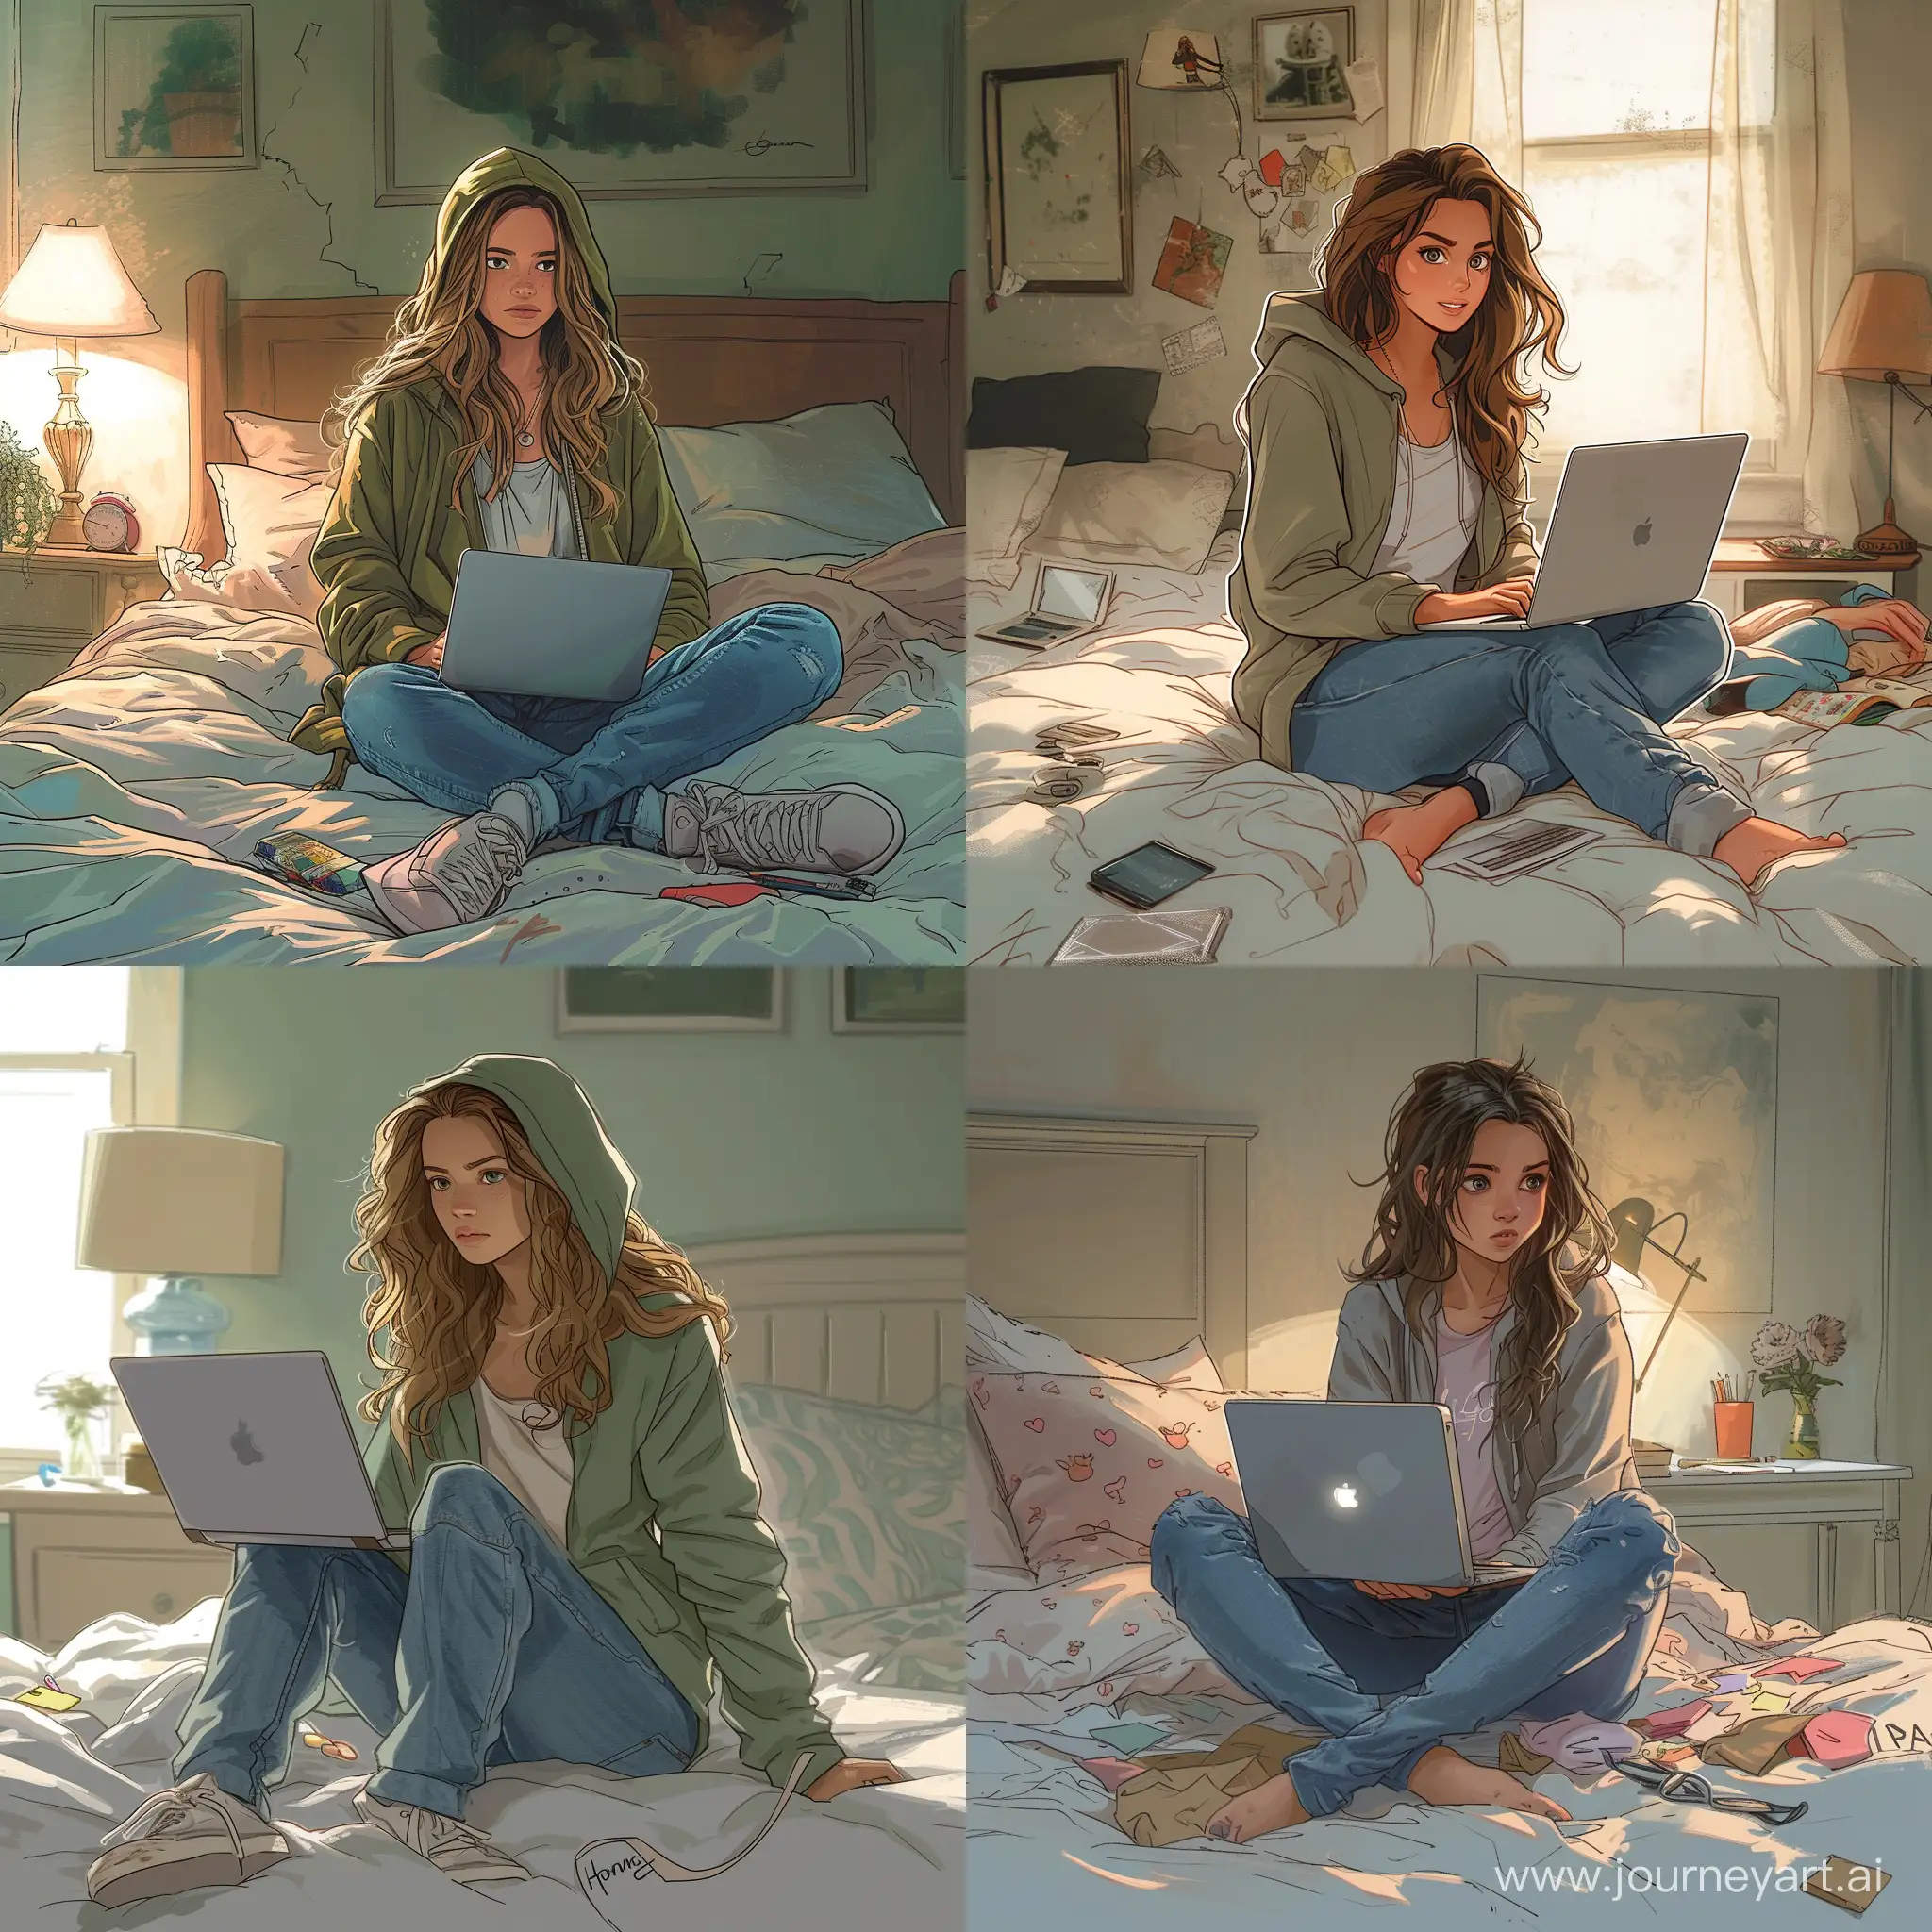 Indiana evans, Bella from h2o, teenager, 15 years old, hoodie, jeans, laptop, sitting on the bed in the bedroom, mess, high quality, high detail, cartoon art